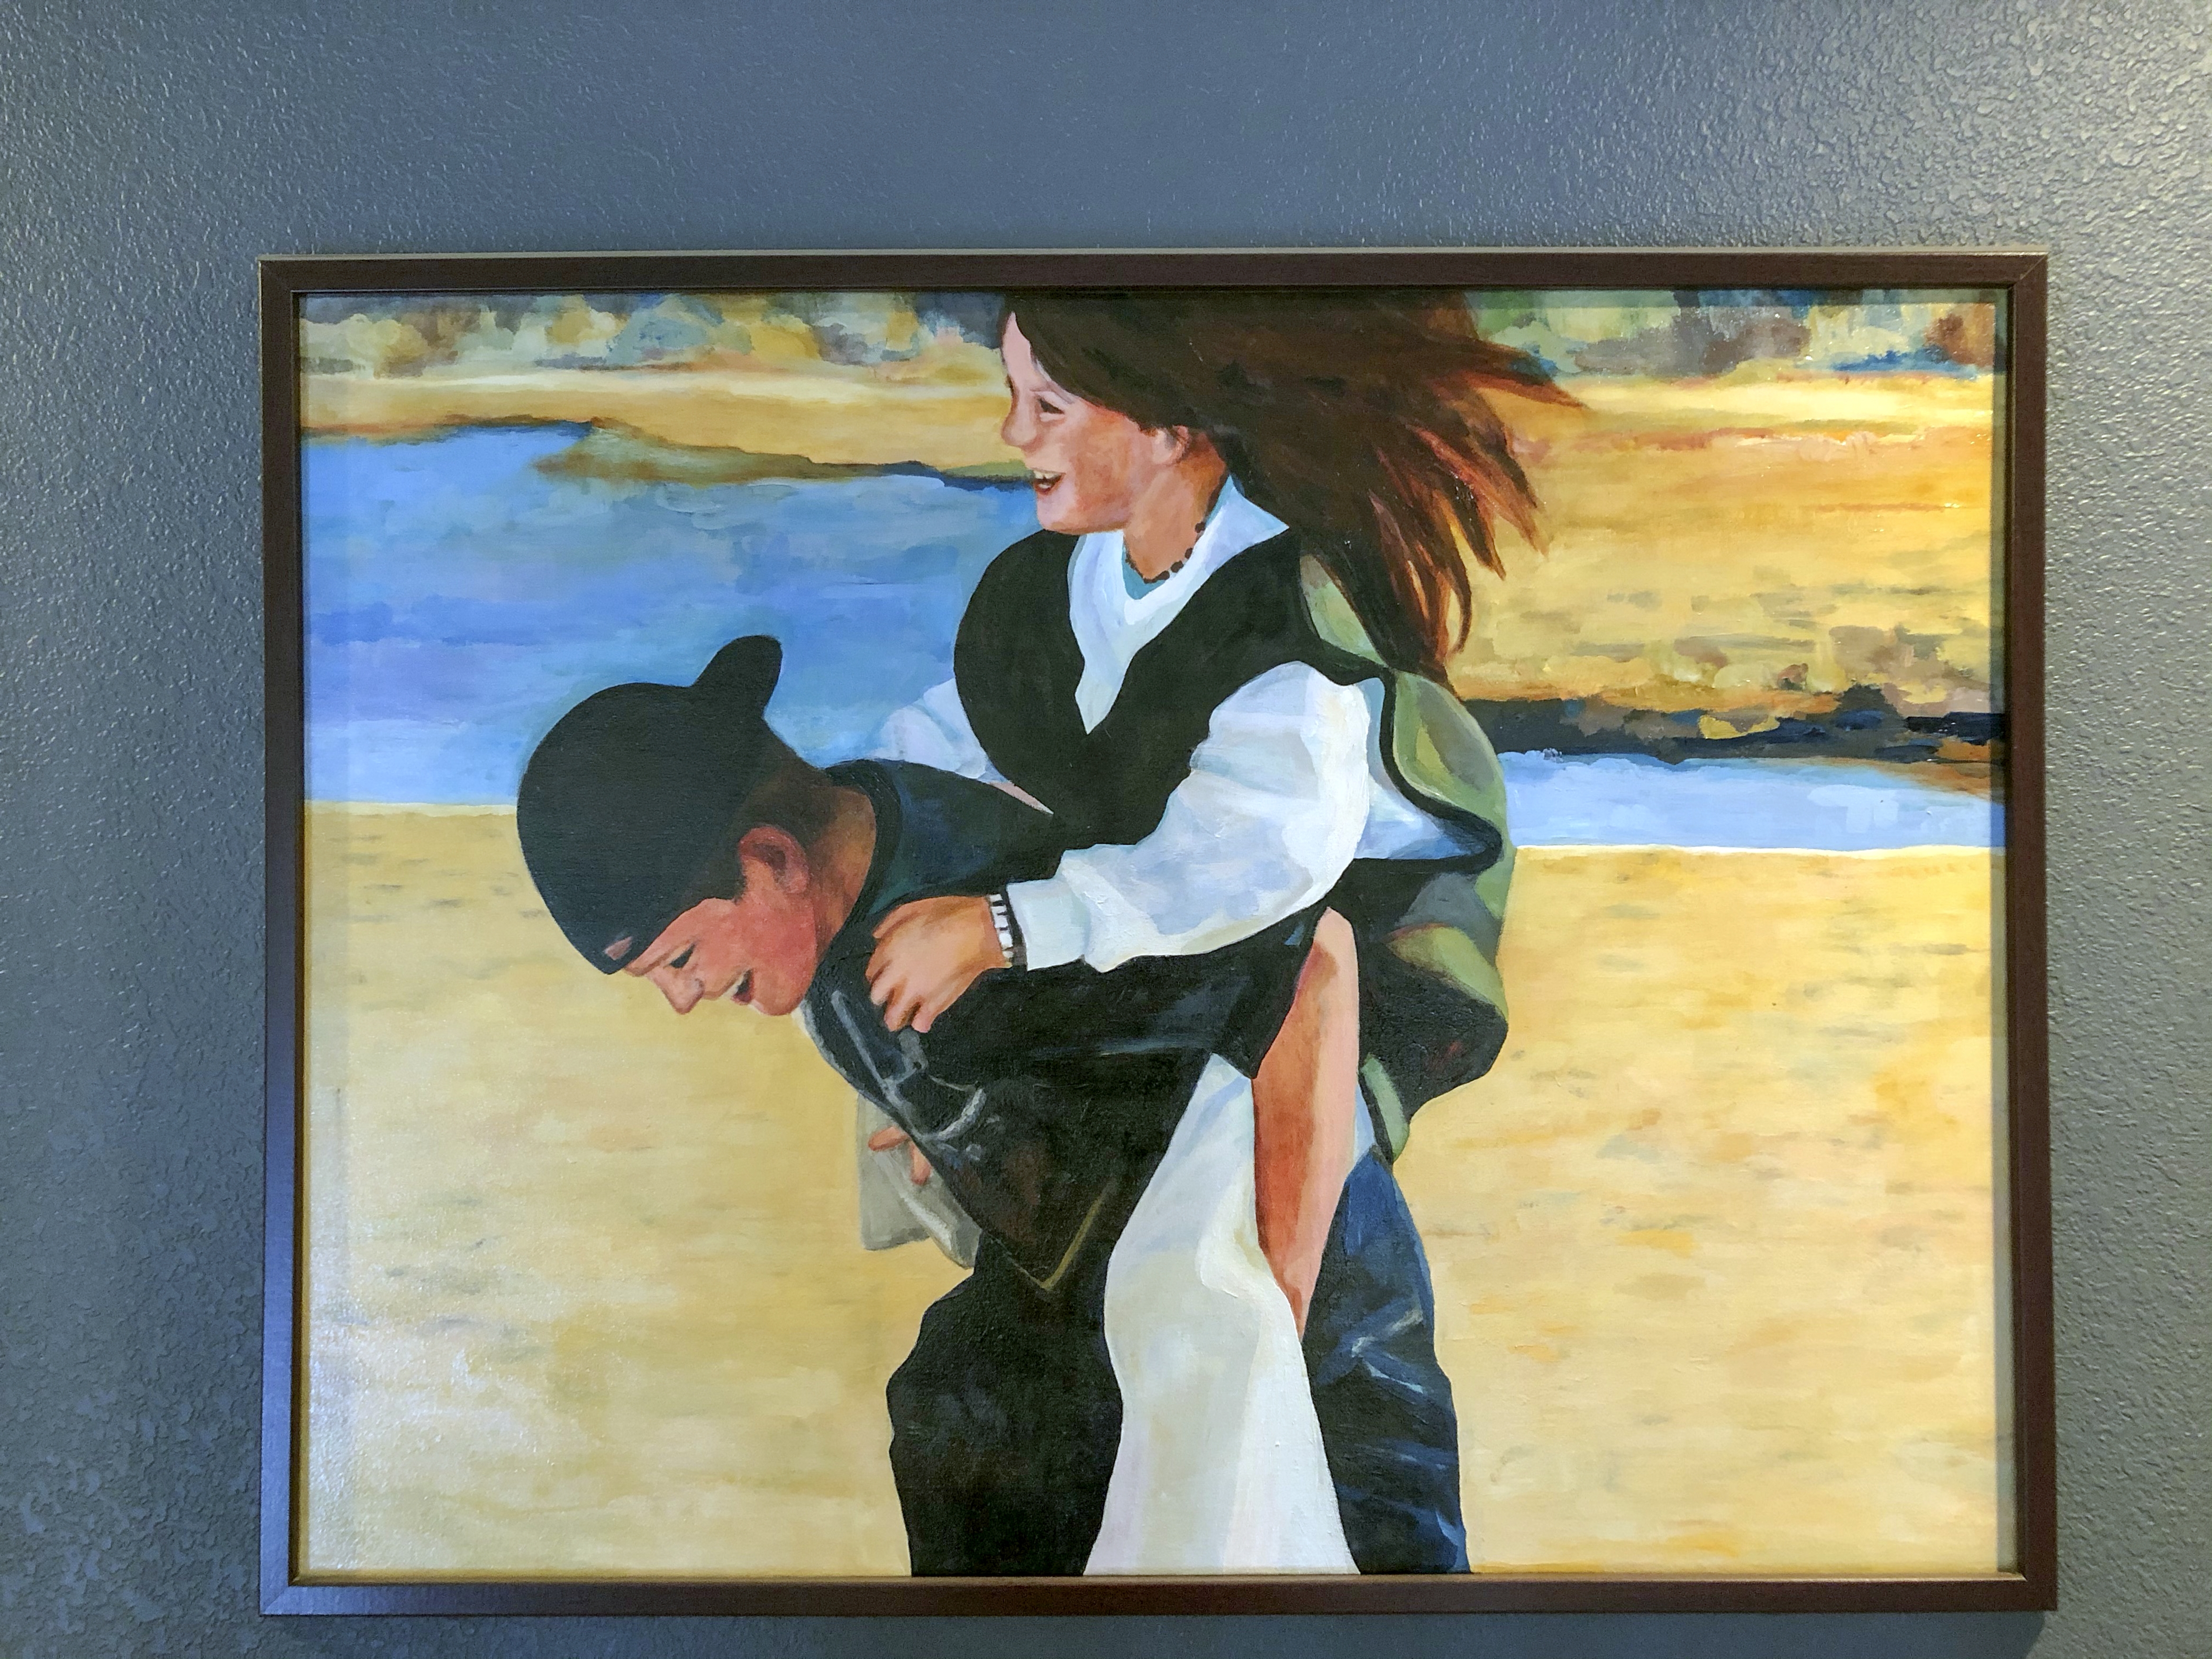 A painting of two children. A boy is giving the girl a piggyback ride. the children are laughing and having fun